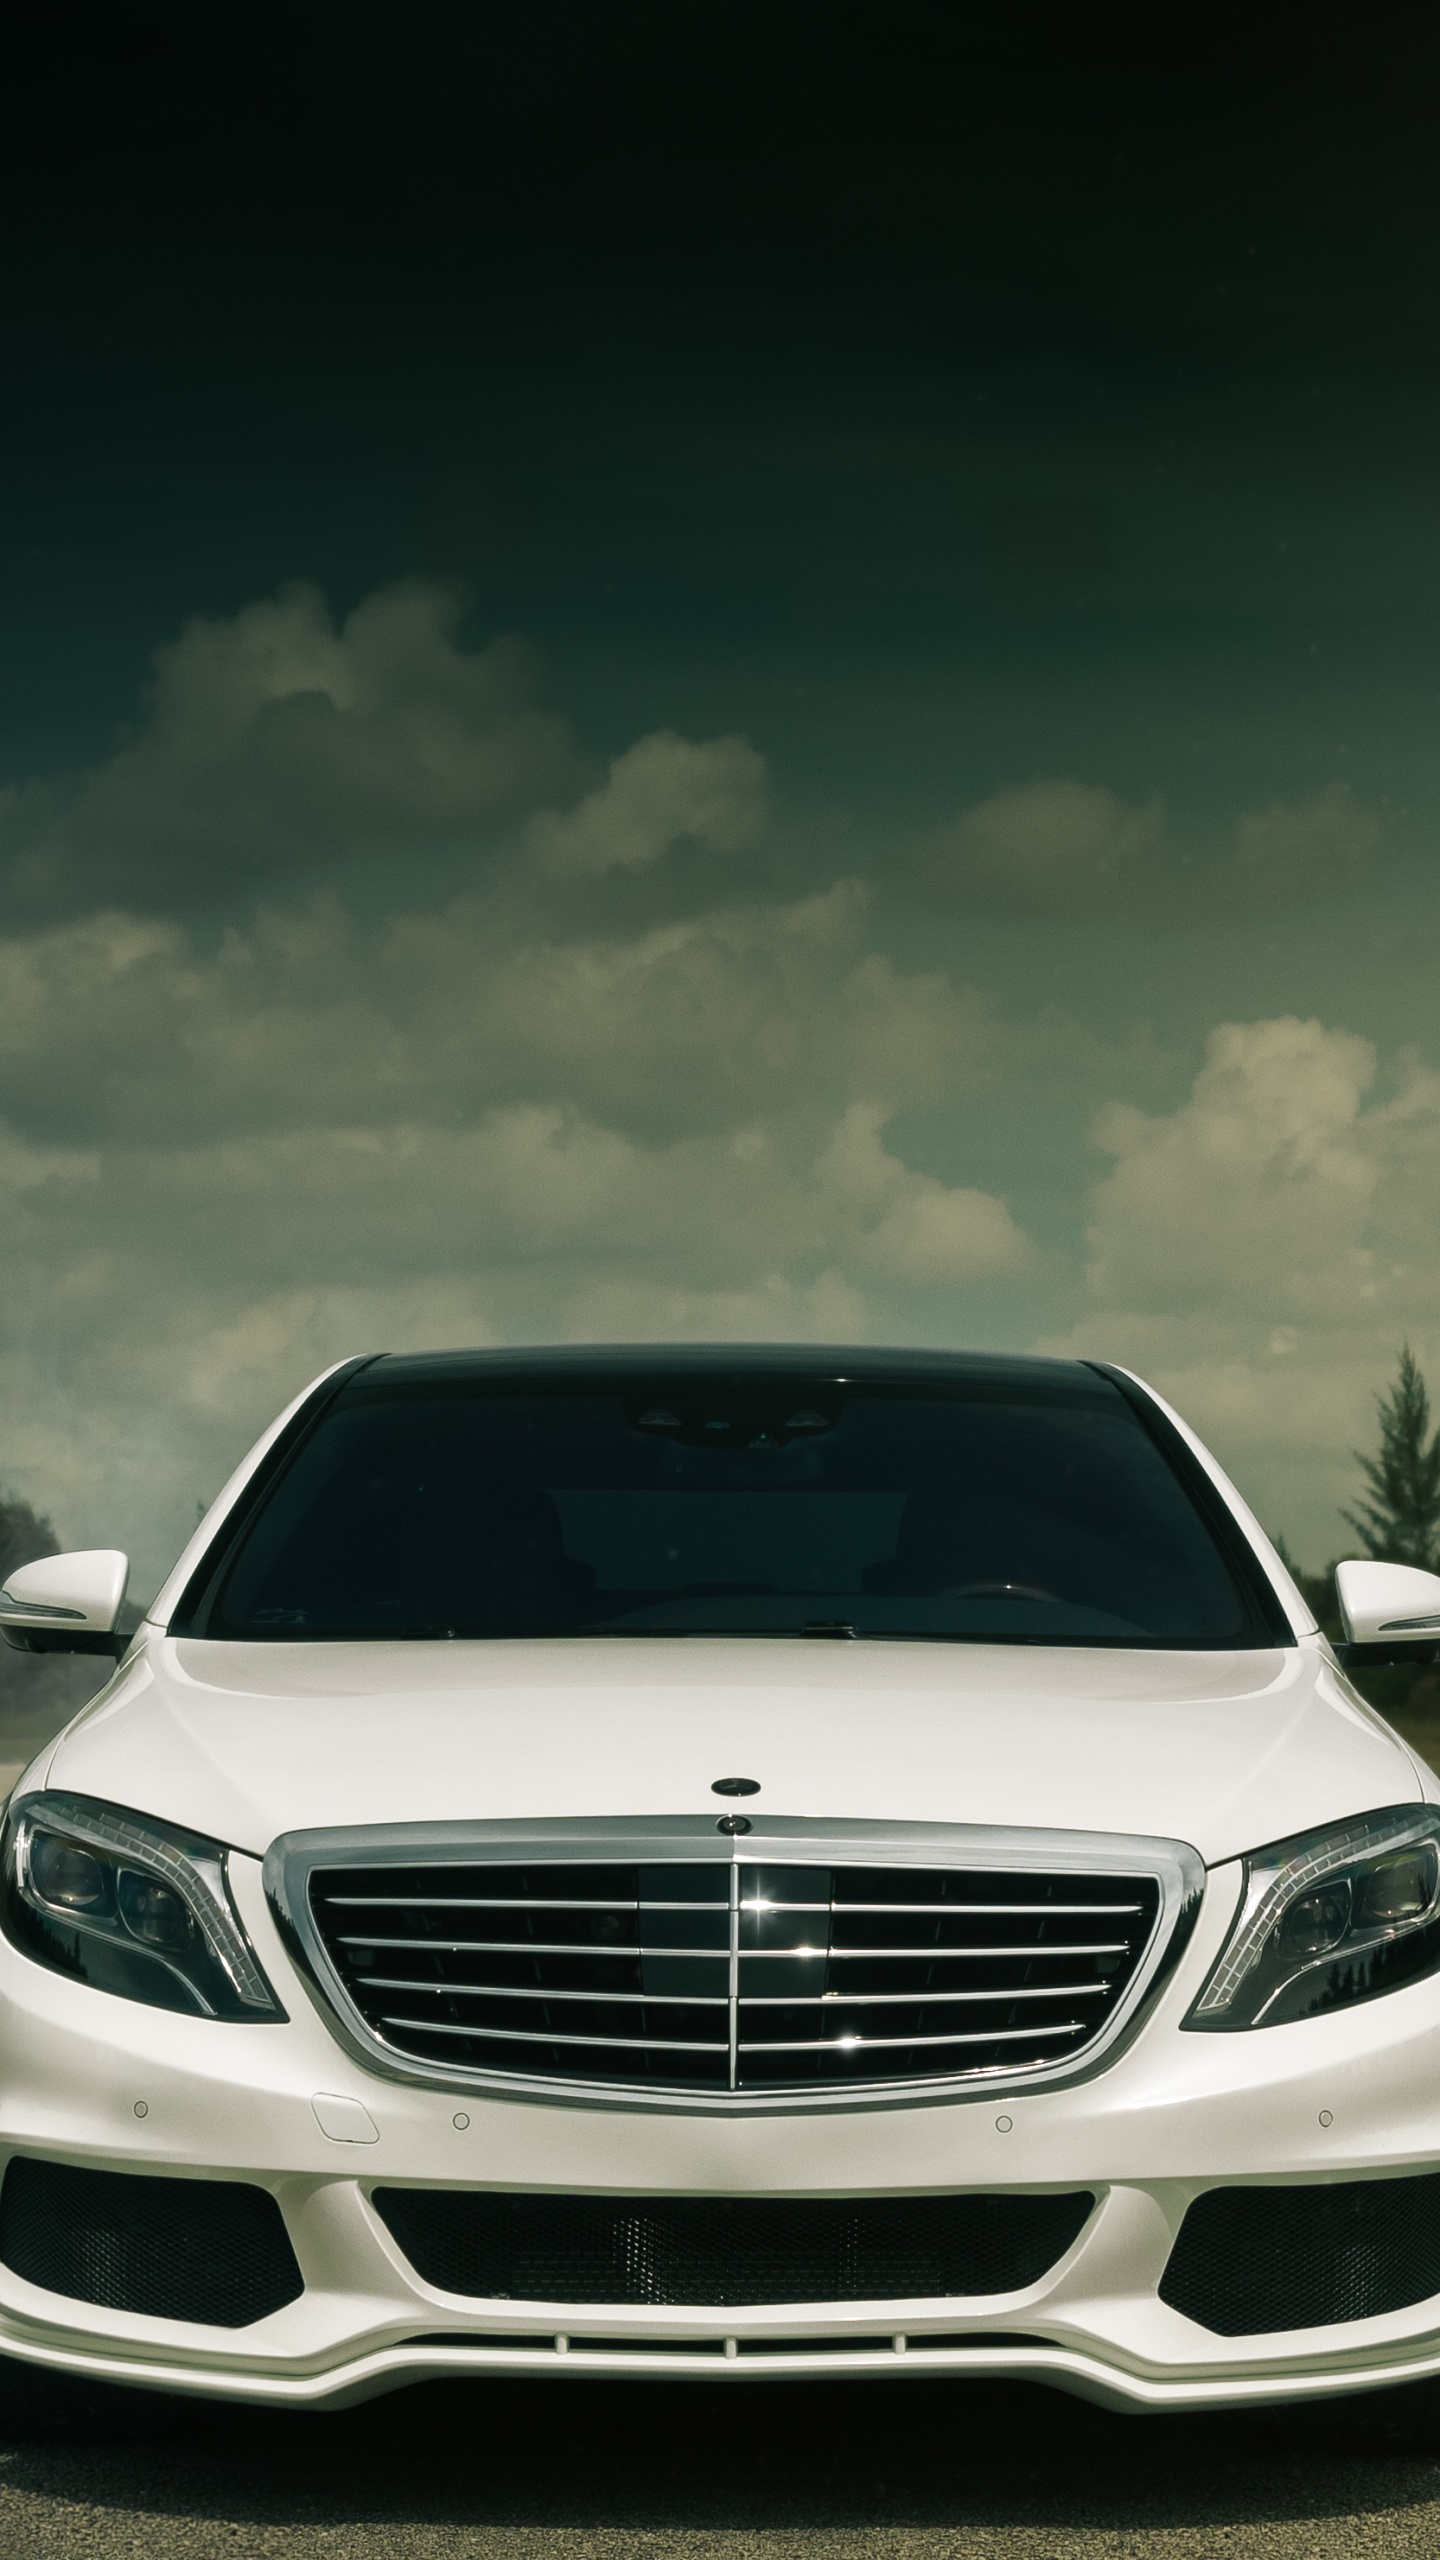 White Mercedes Benz Car on Road During Night Time. Wallpaper in 1440x2560 Resolution